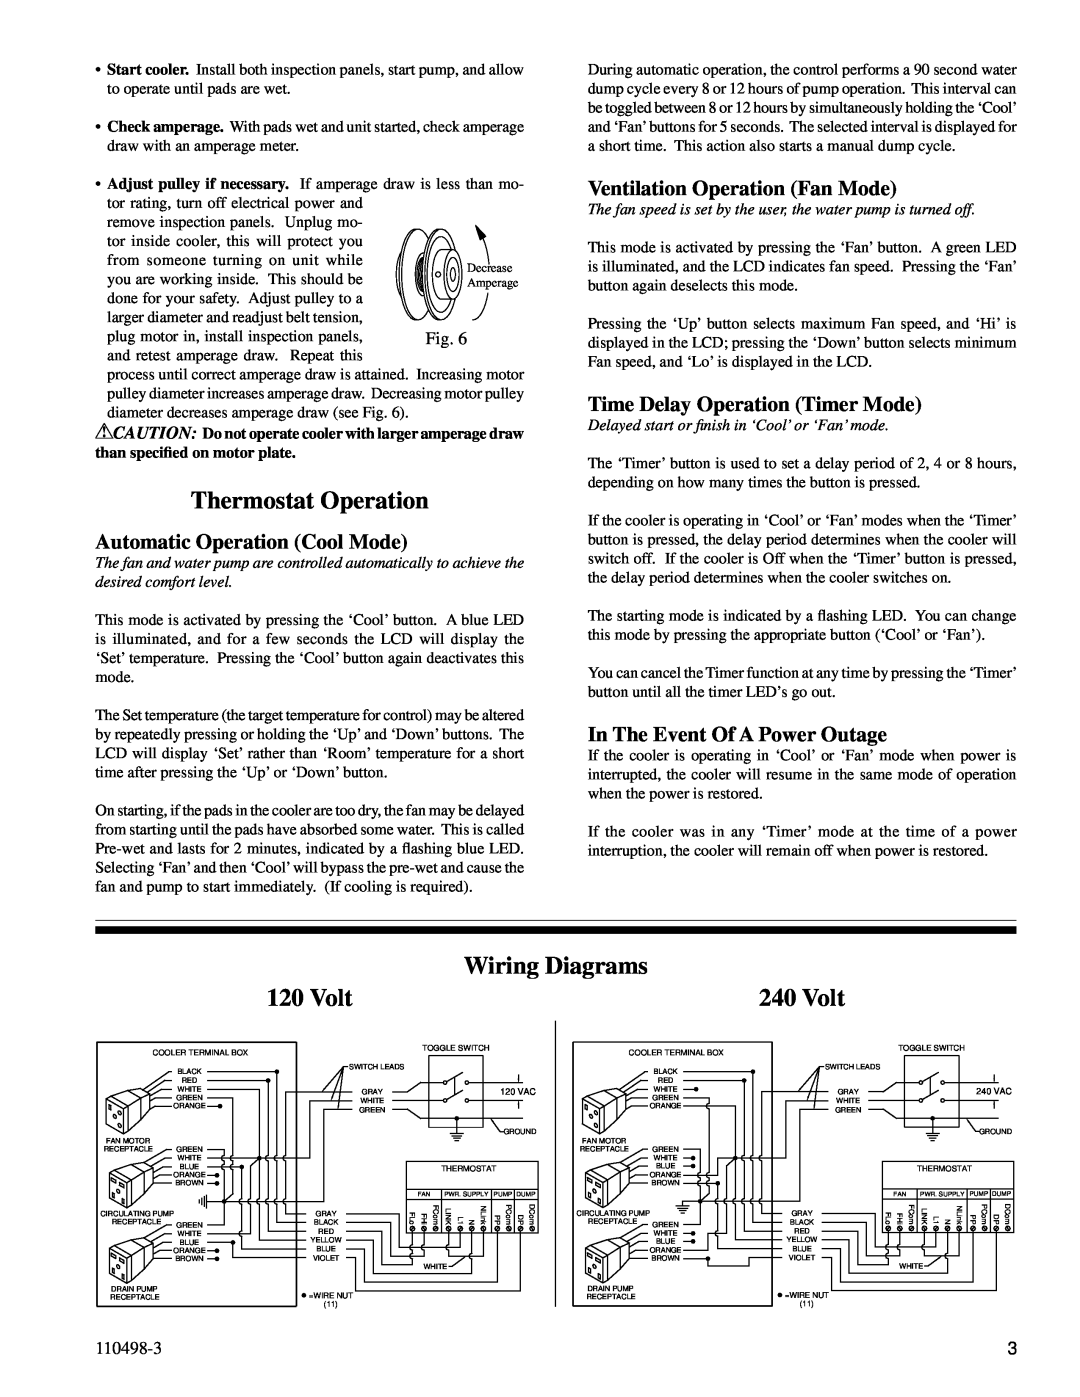 Essick Air AS1C7112, AS2C71, AS1C51 Thermostat Operation, Wiring Diagrams 120 Volt, Automatic Operation Cool Mode, 110498-3 